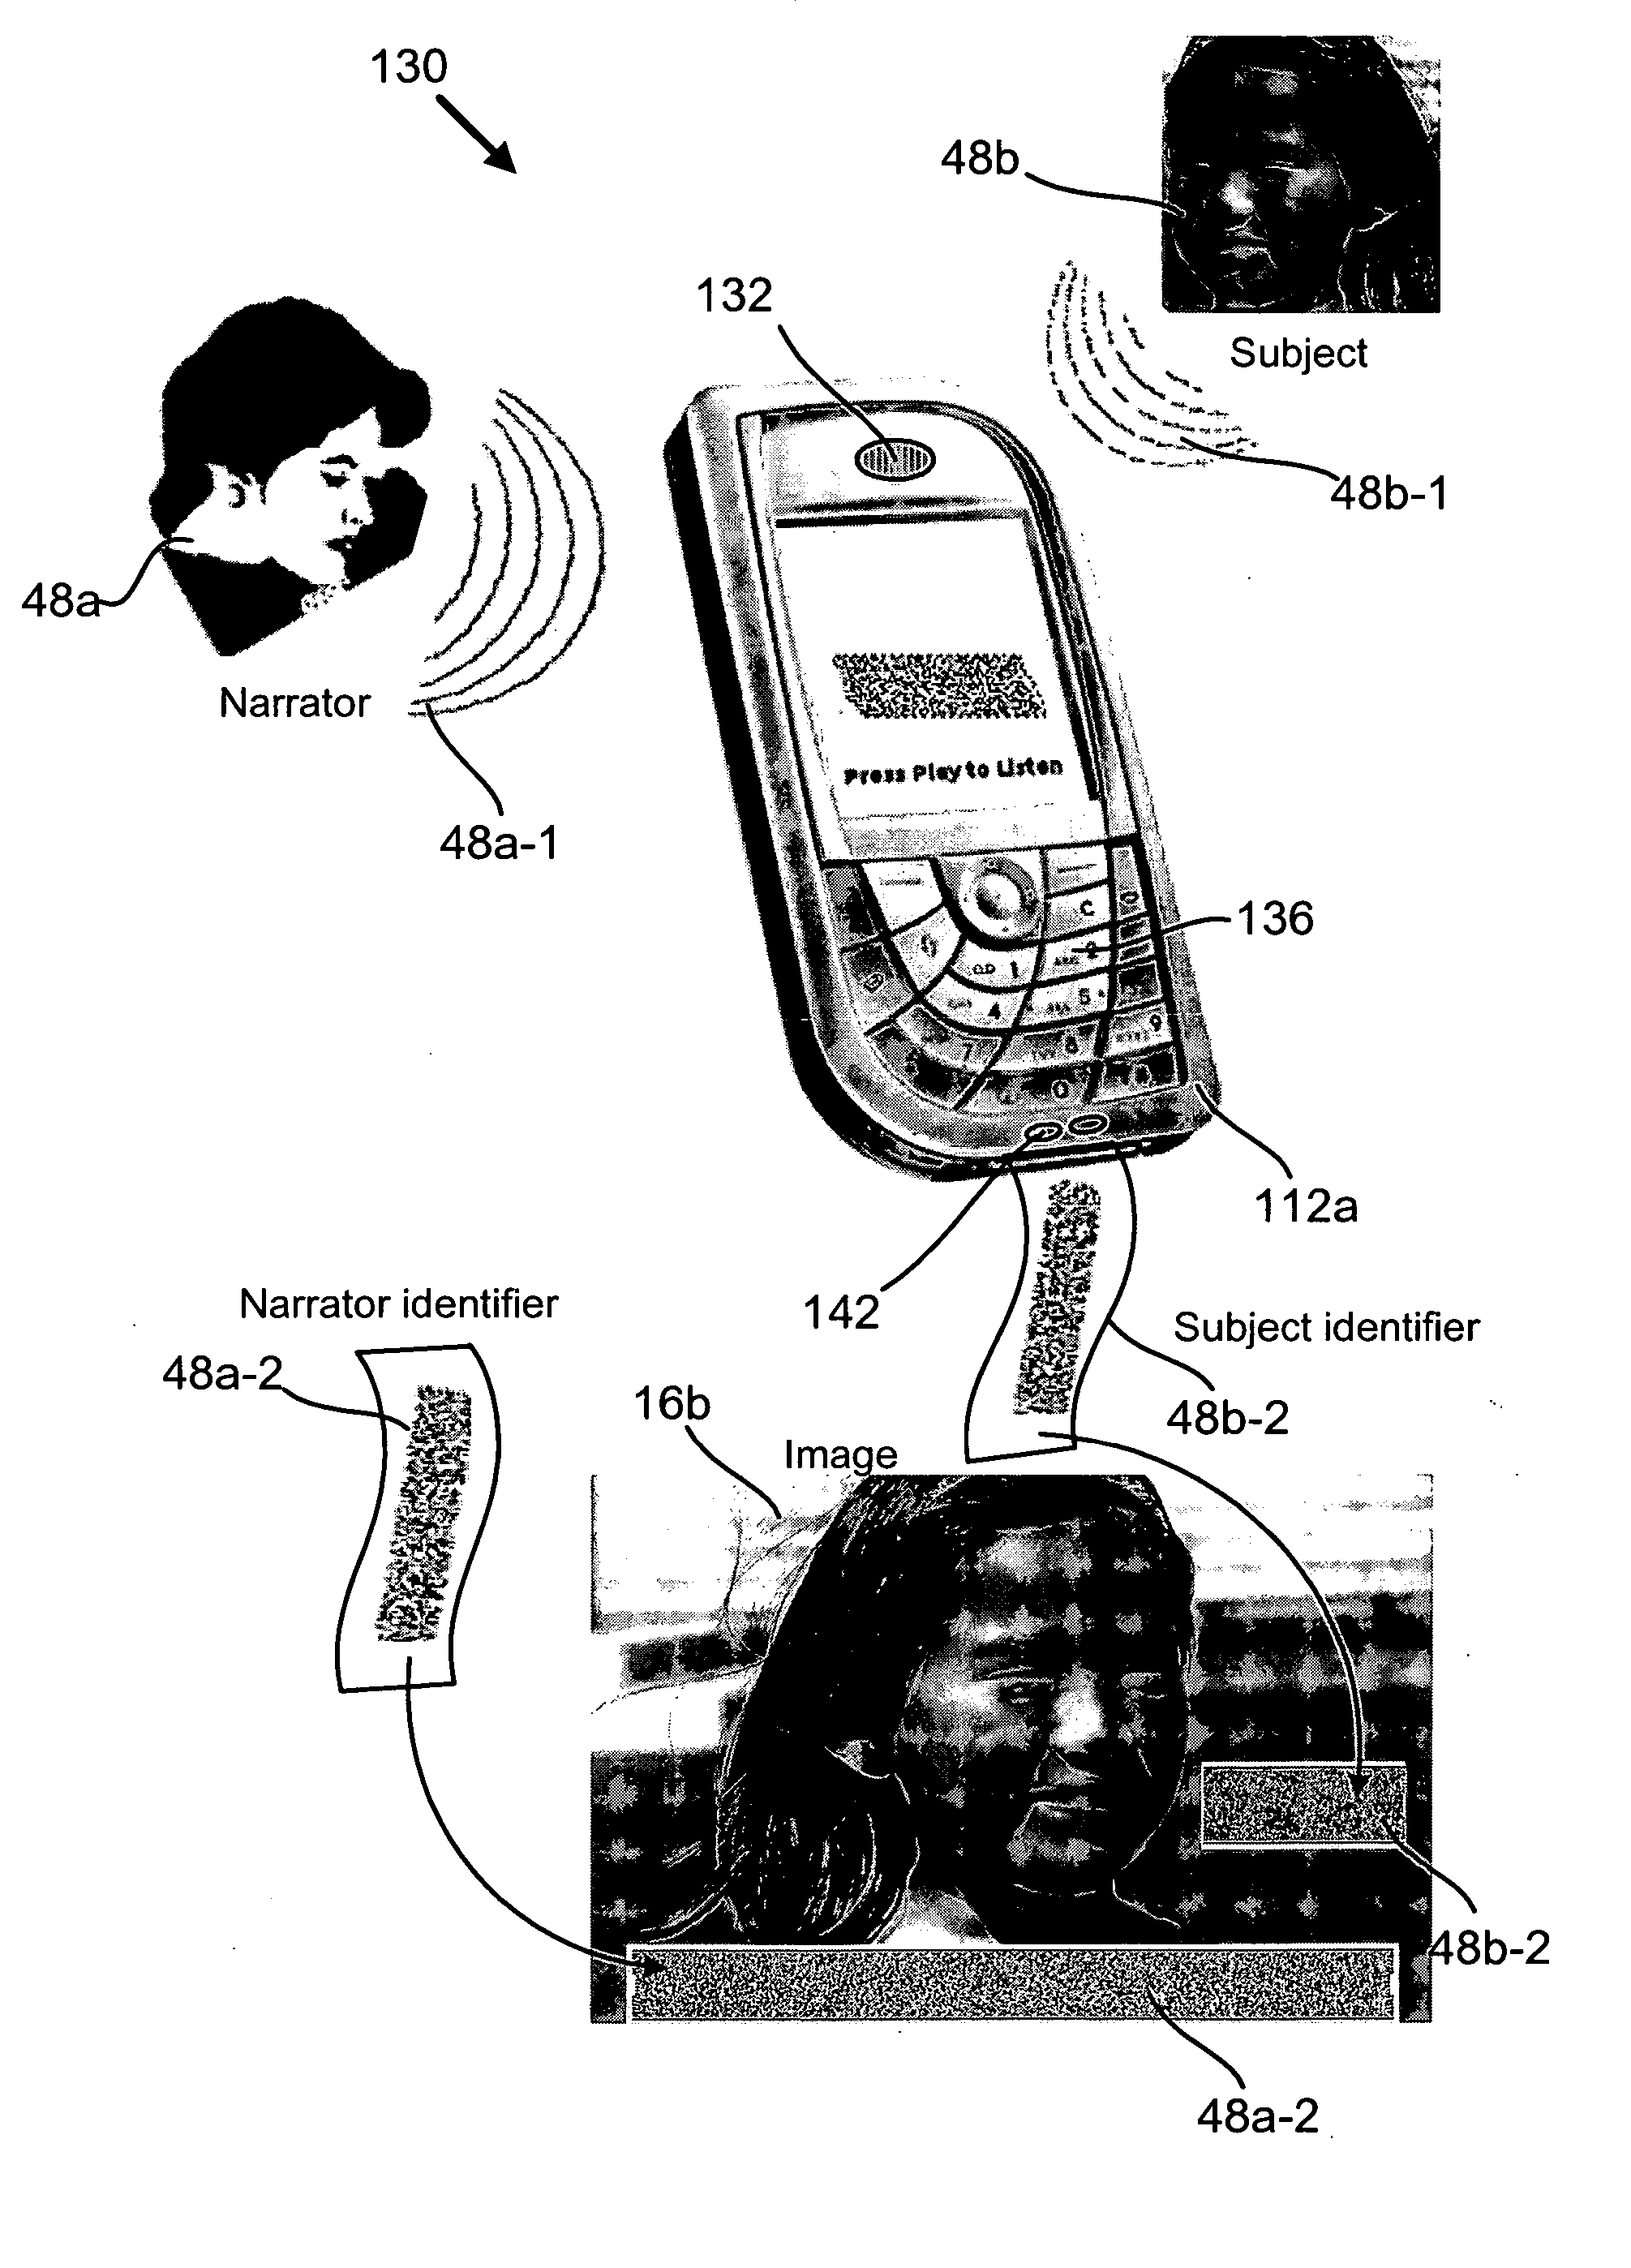 Systems and methods for generating, reading and transferring identifiers